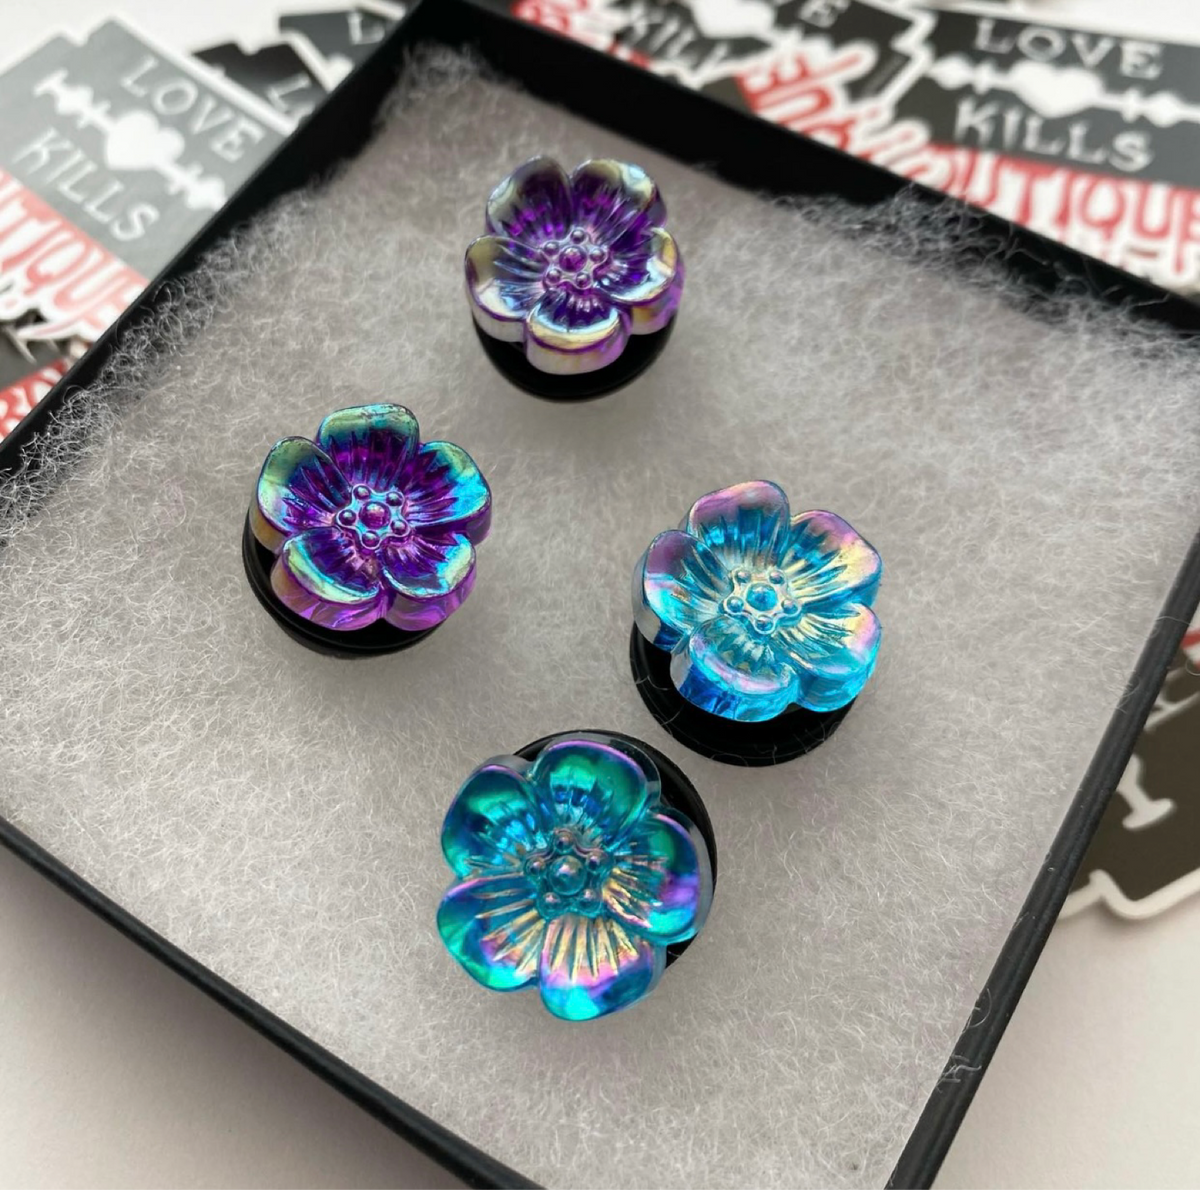  Hibiscus flower plugs for stretched lobes with an iridescent background